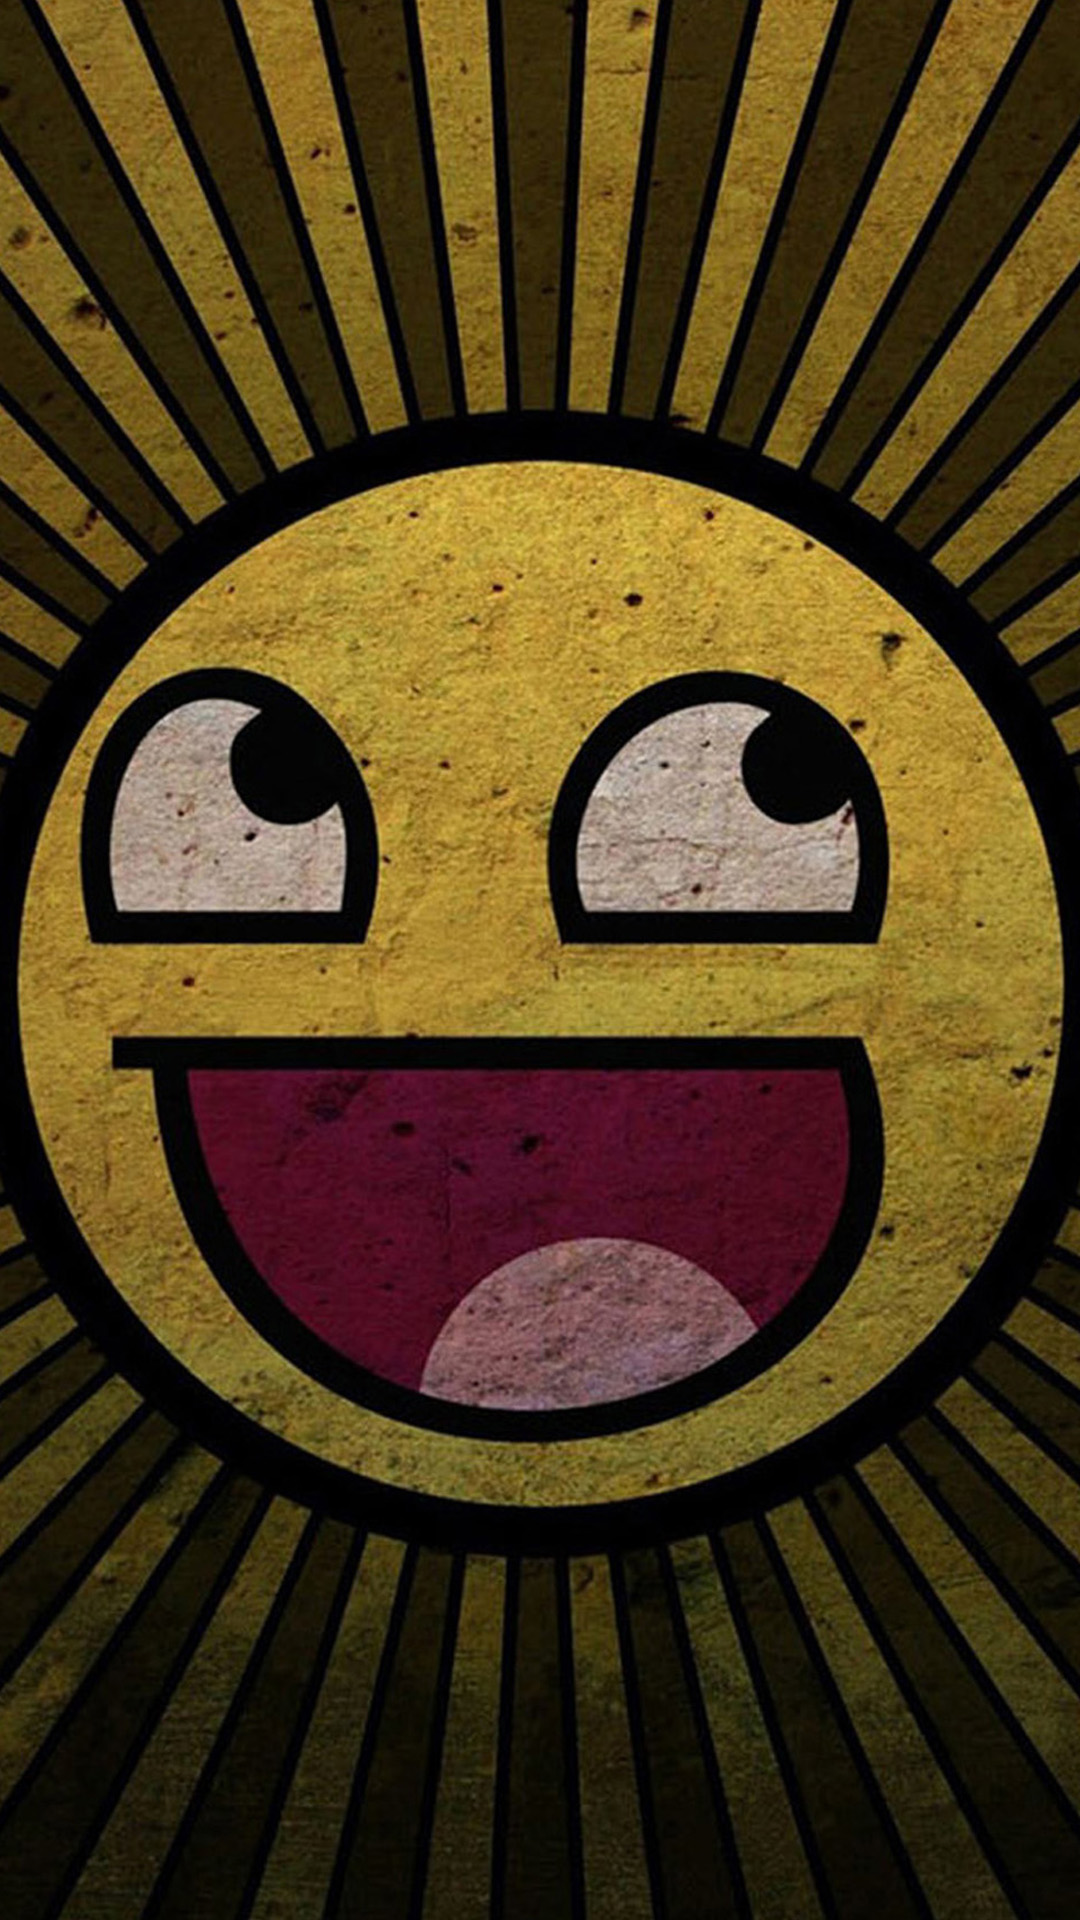 Funny Smiley Android wallpaper